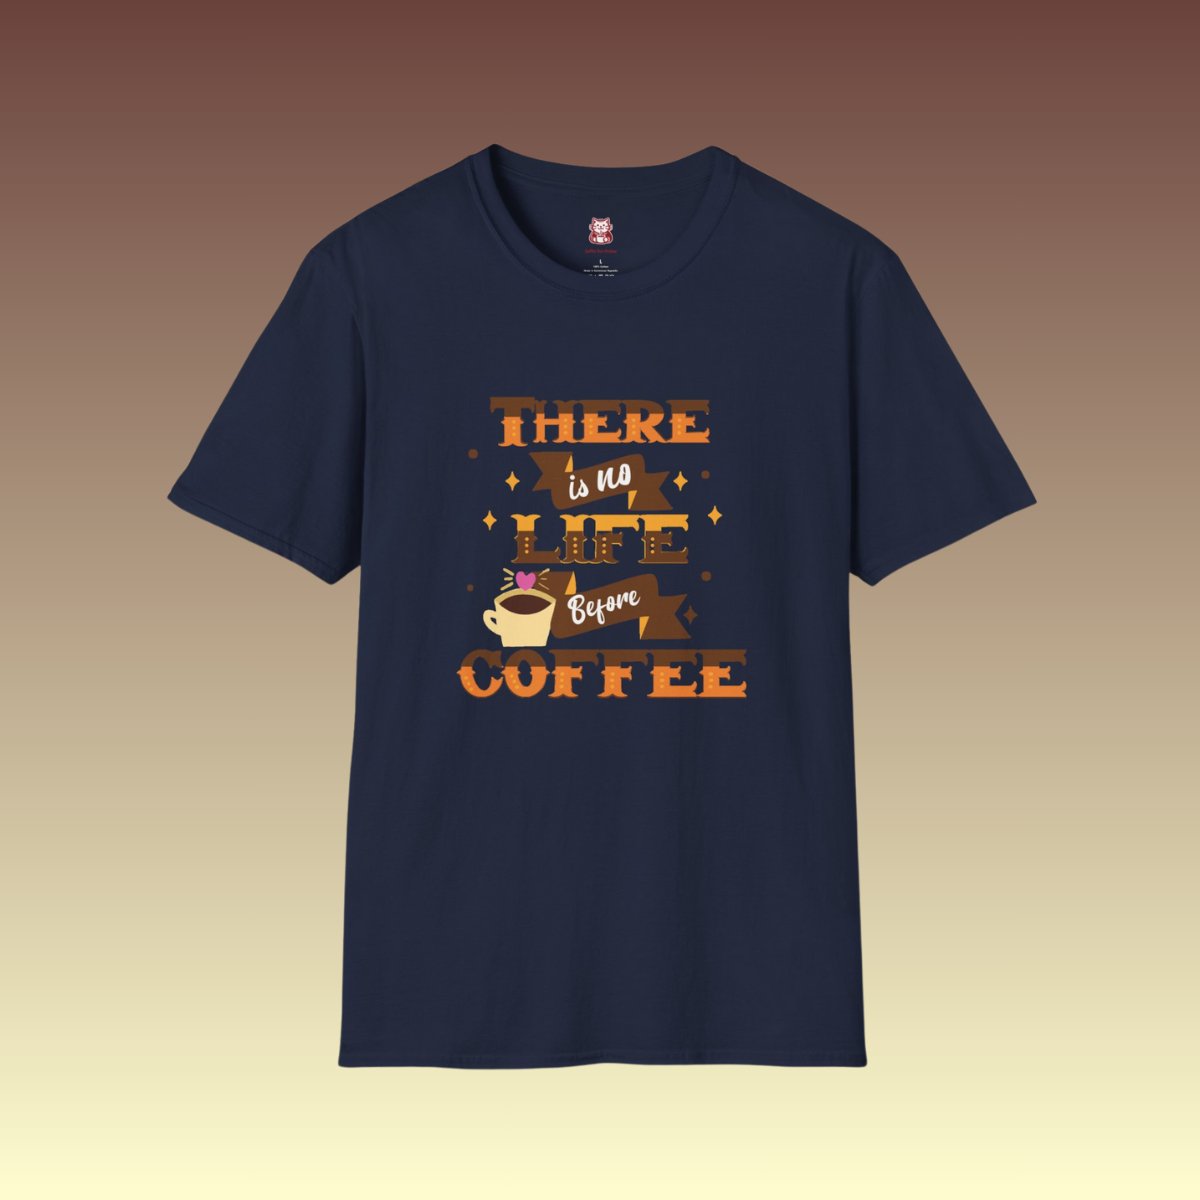 There Is No Life Before Coffee Tee - Coffee Purrfection